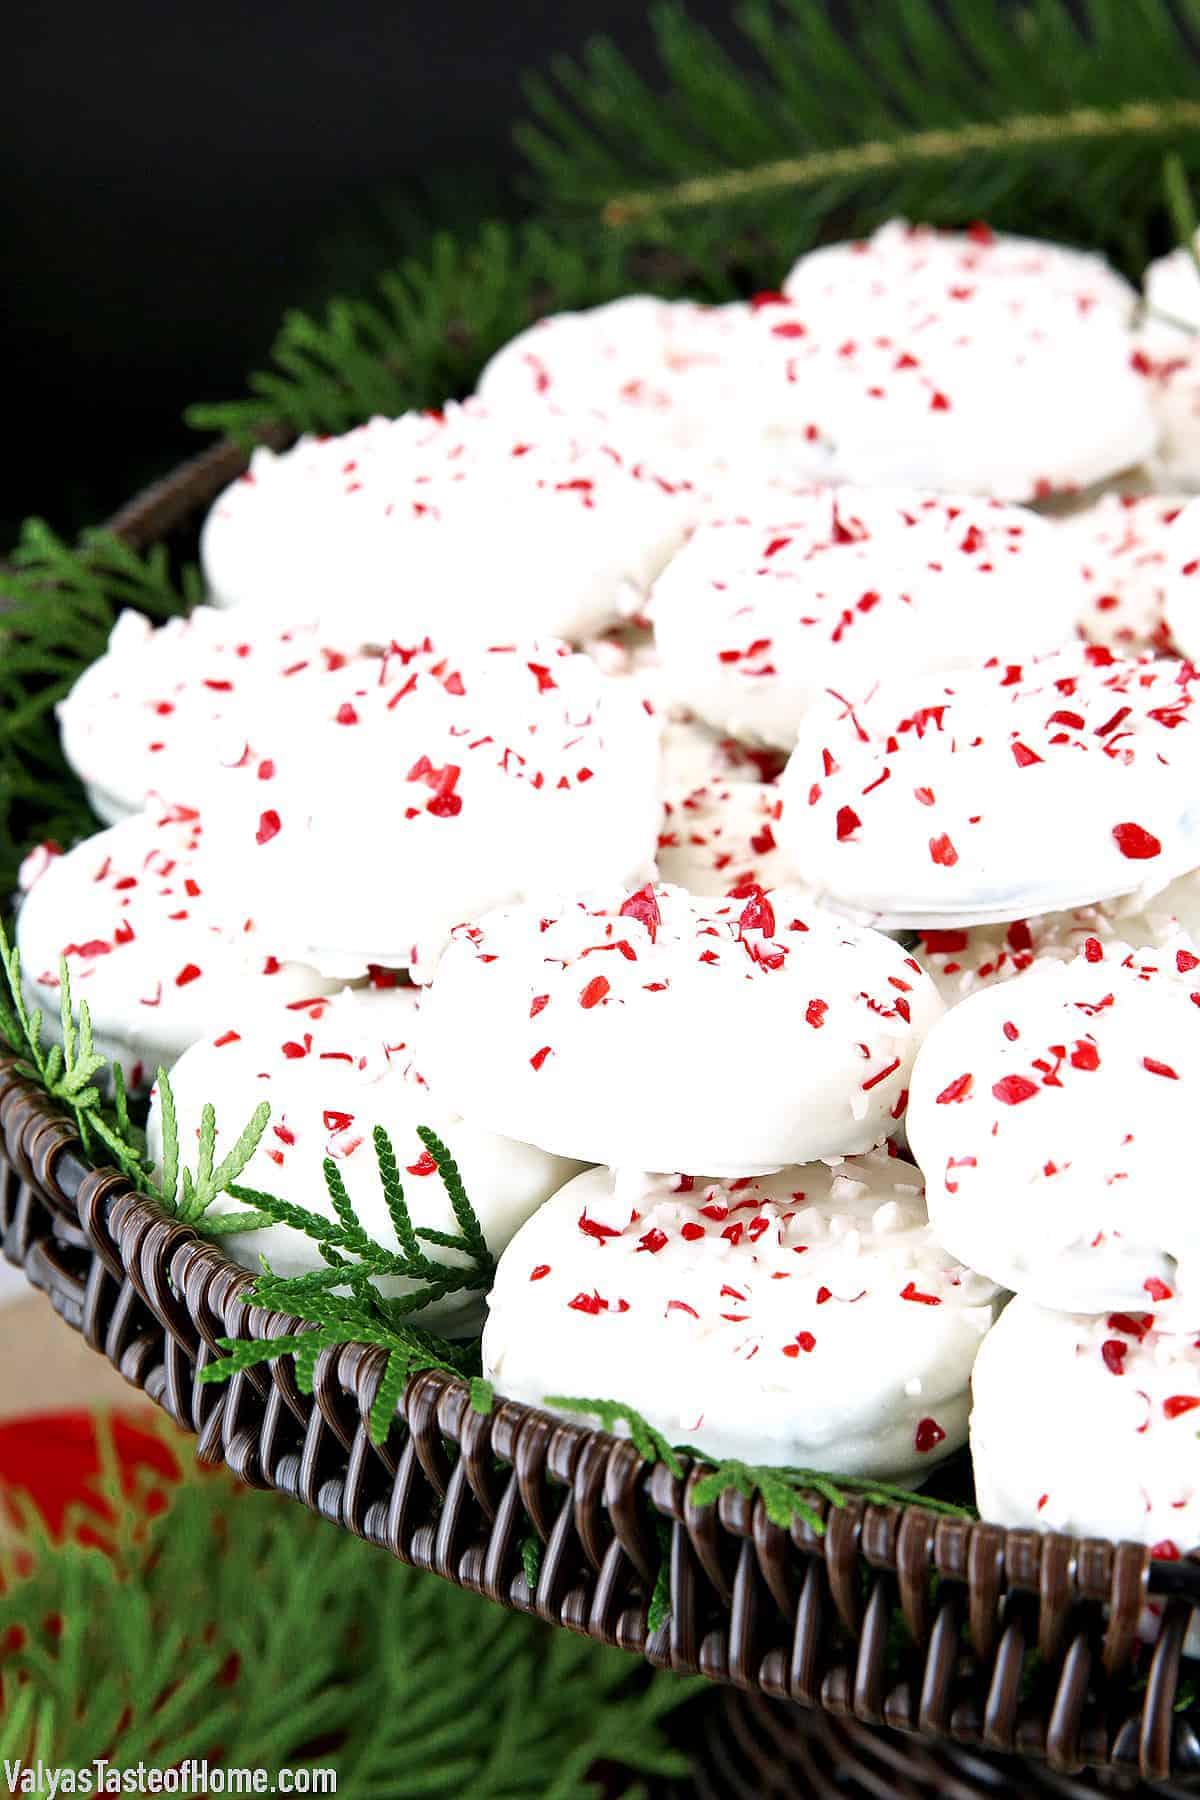 These oreo cookies dipped in white chocolate and sprinkled with crushed peppermint candies are festive, very attractive, and make for a beautiful display on a party tray.